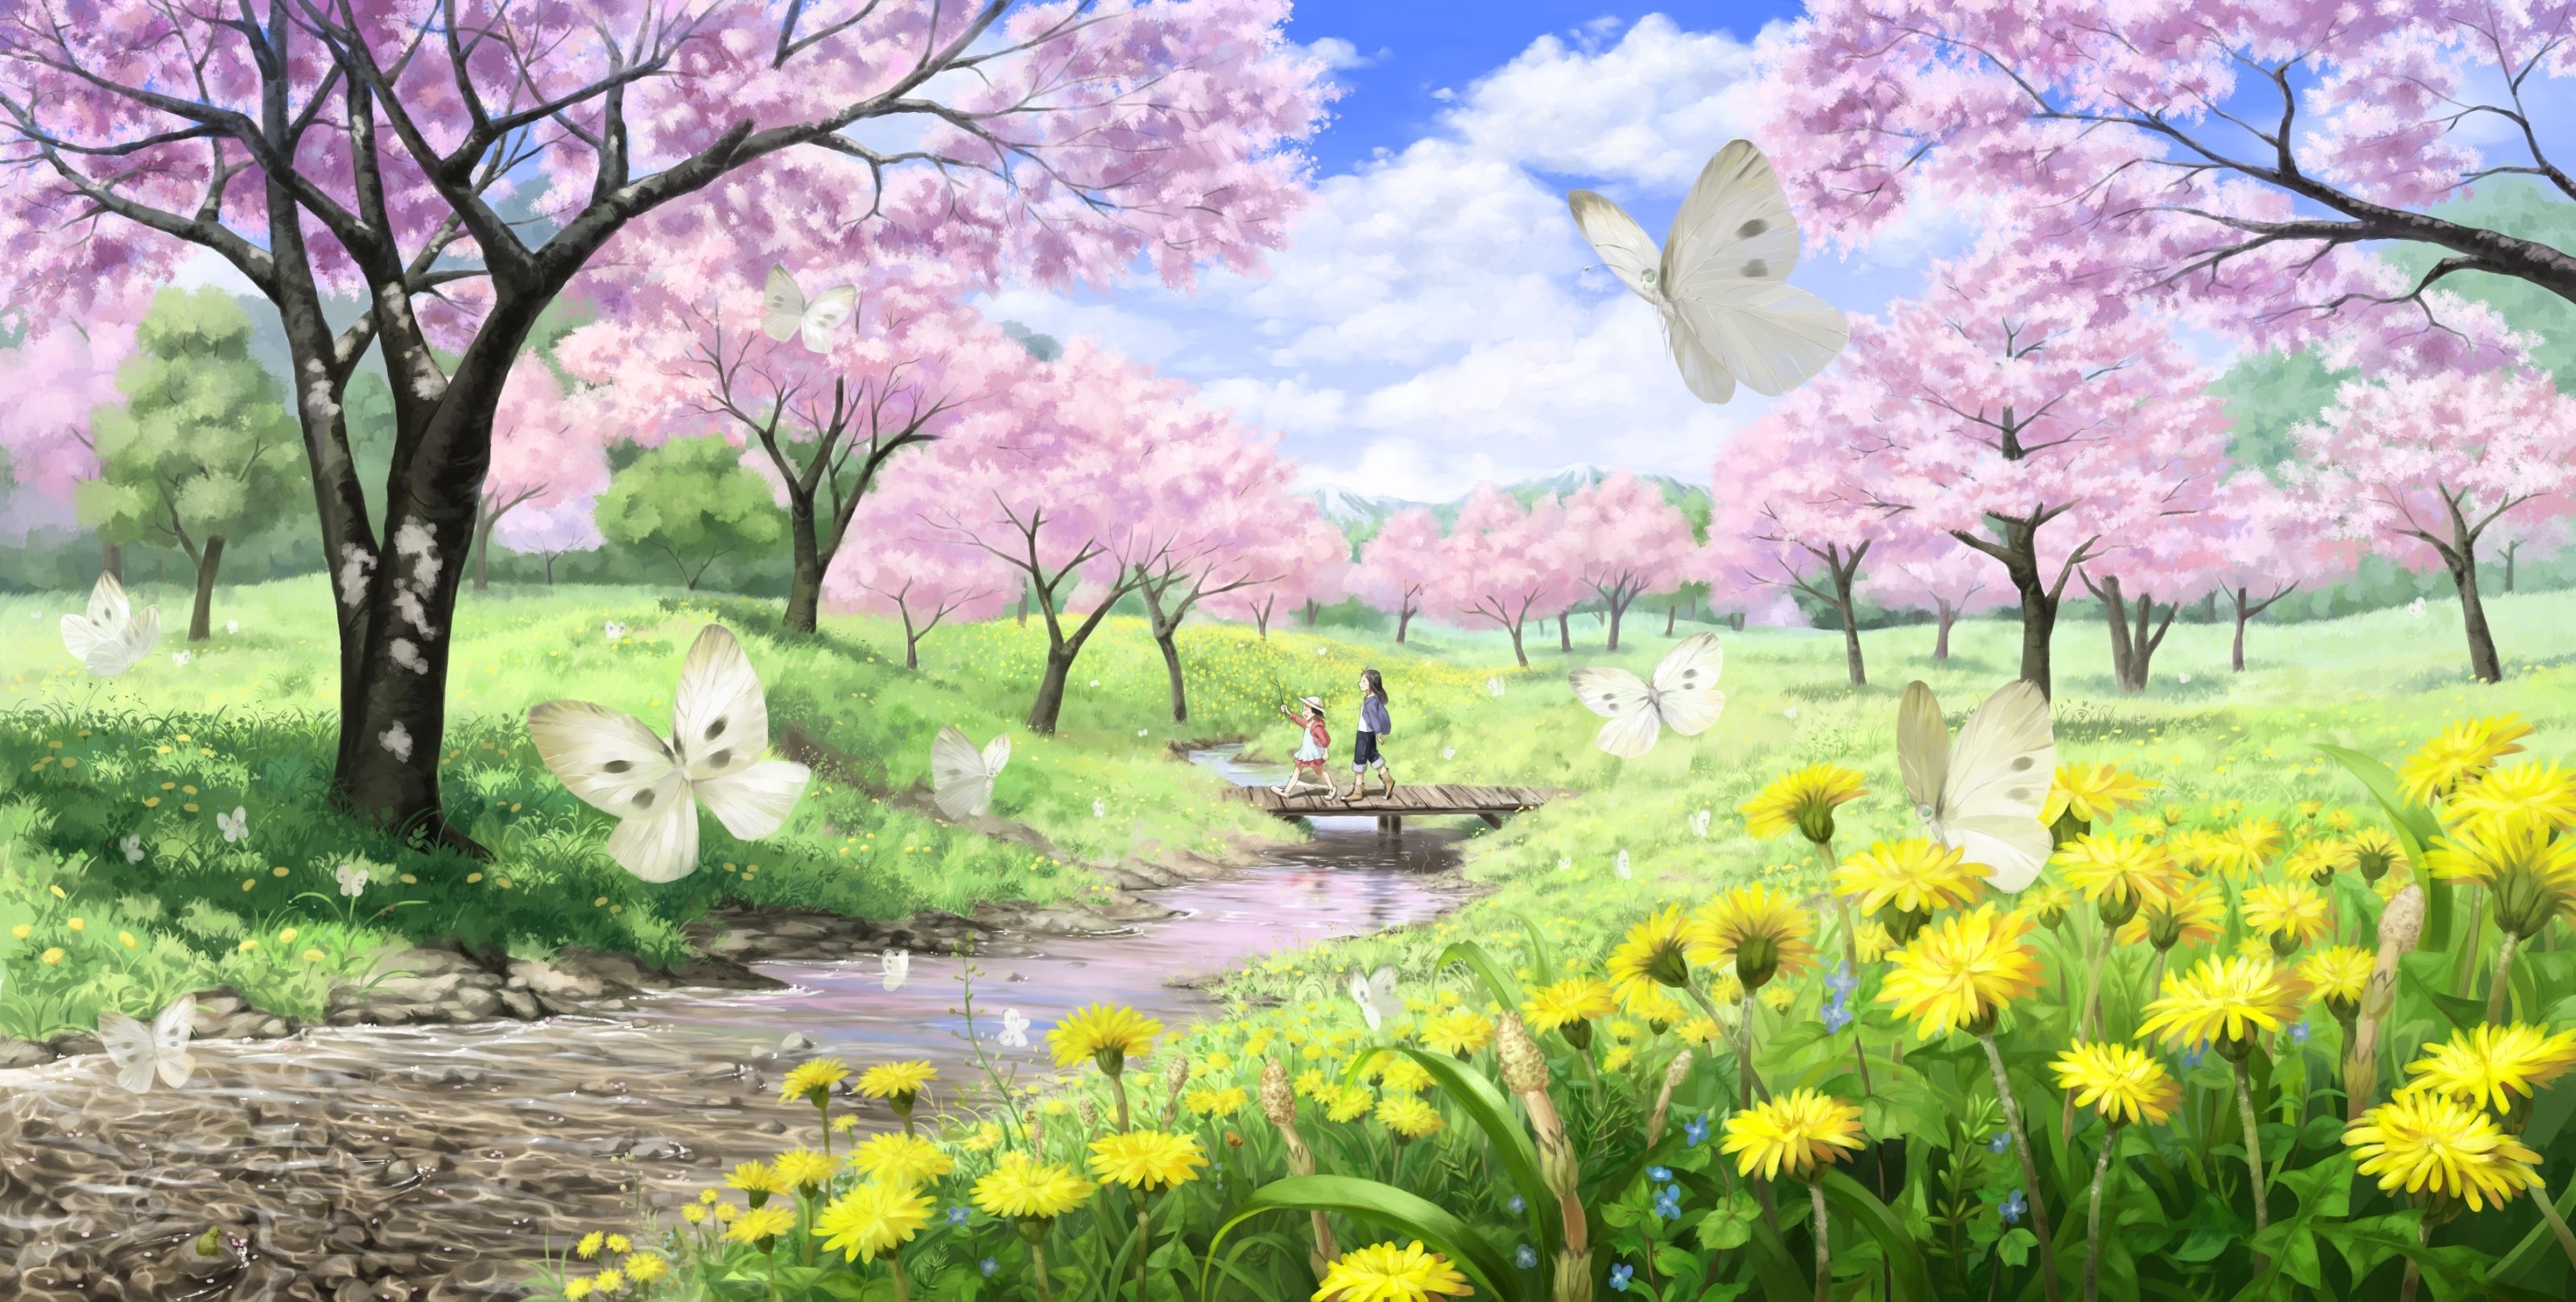 My collection of anime sceneries. Spring scenery, Spring wallpaper, Anime scenery